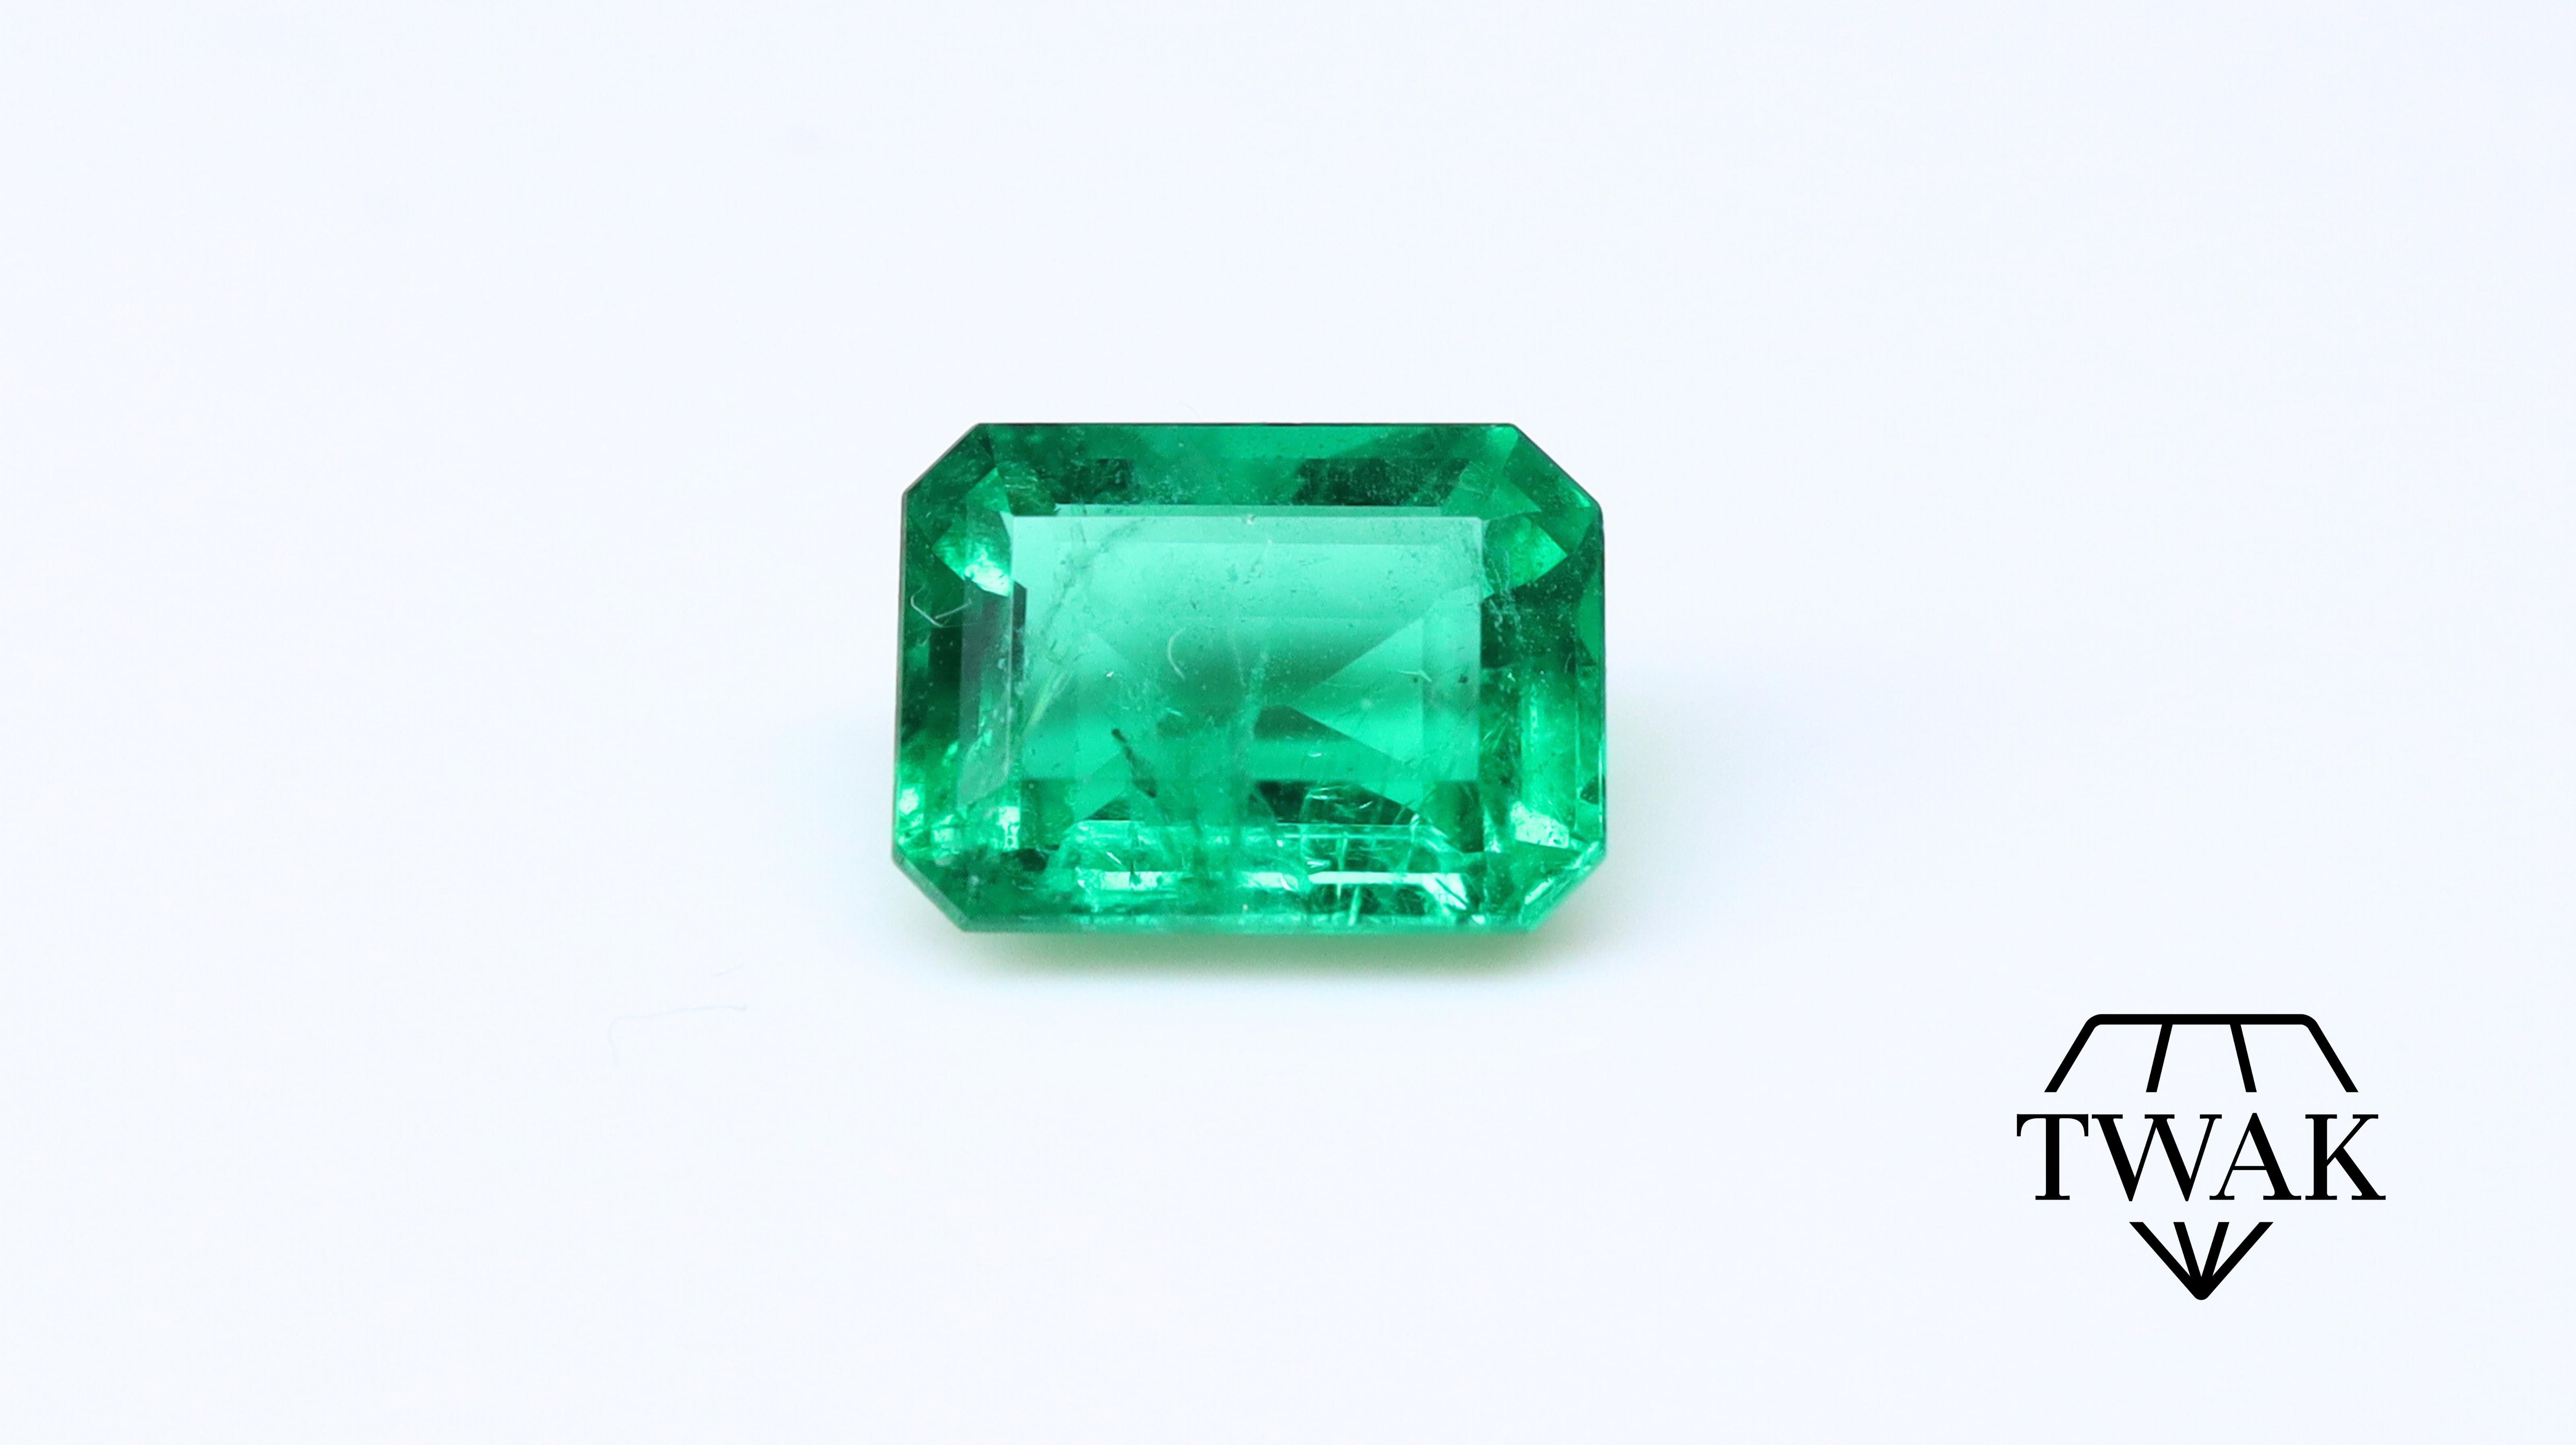 A beautiful Emerald with excellent color, crystal, and saturation.

Details and description:
Dimensions: 7.18 x 5.38 x 3.25mm
Weight: 0.98ct
Color: Intense Green 
Treatment: Oil

Emeralds are naturally porous and inclusive stones, with surface